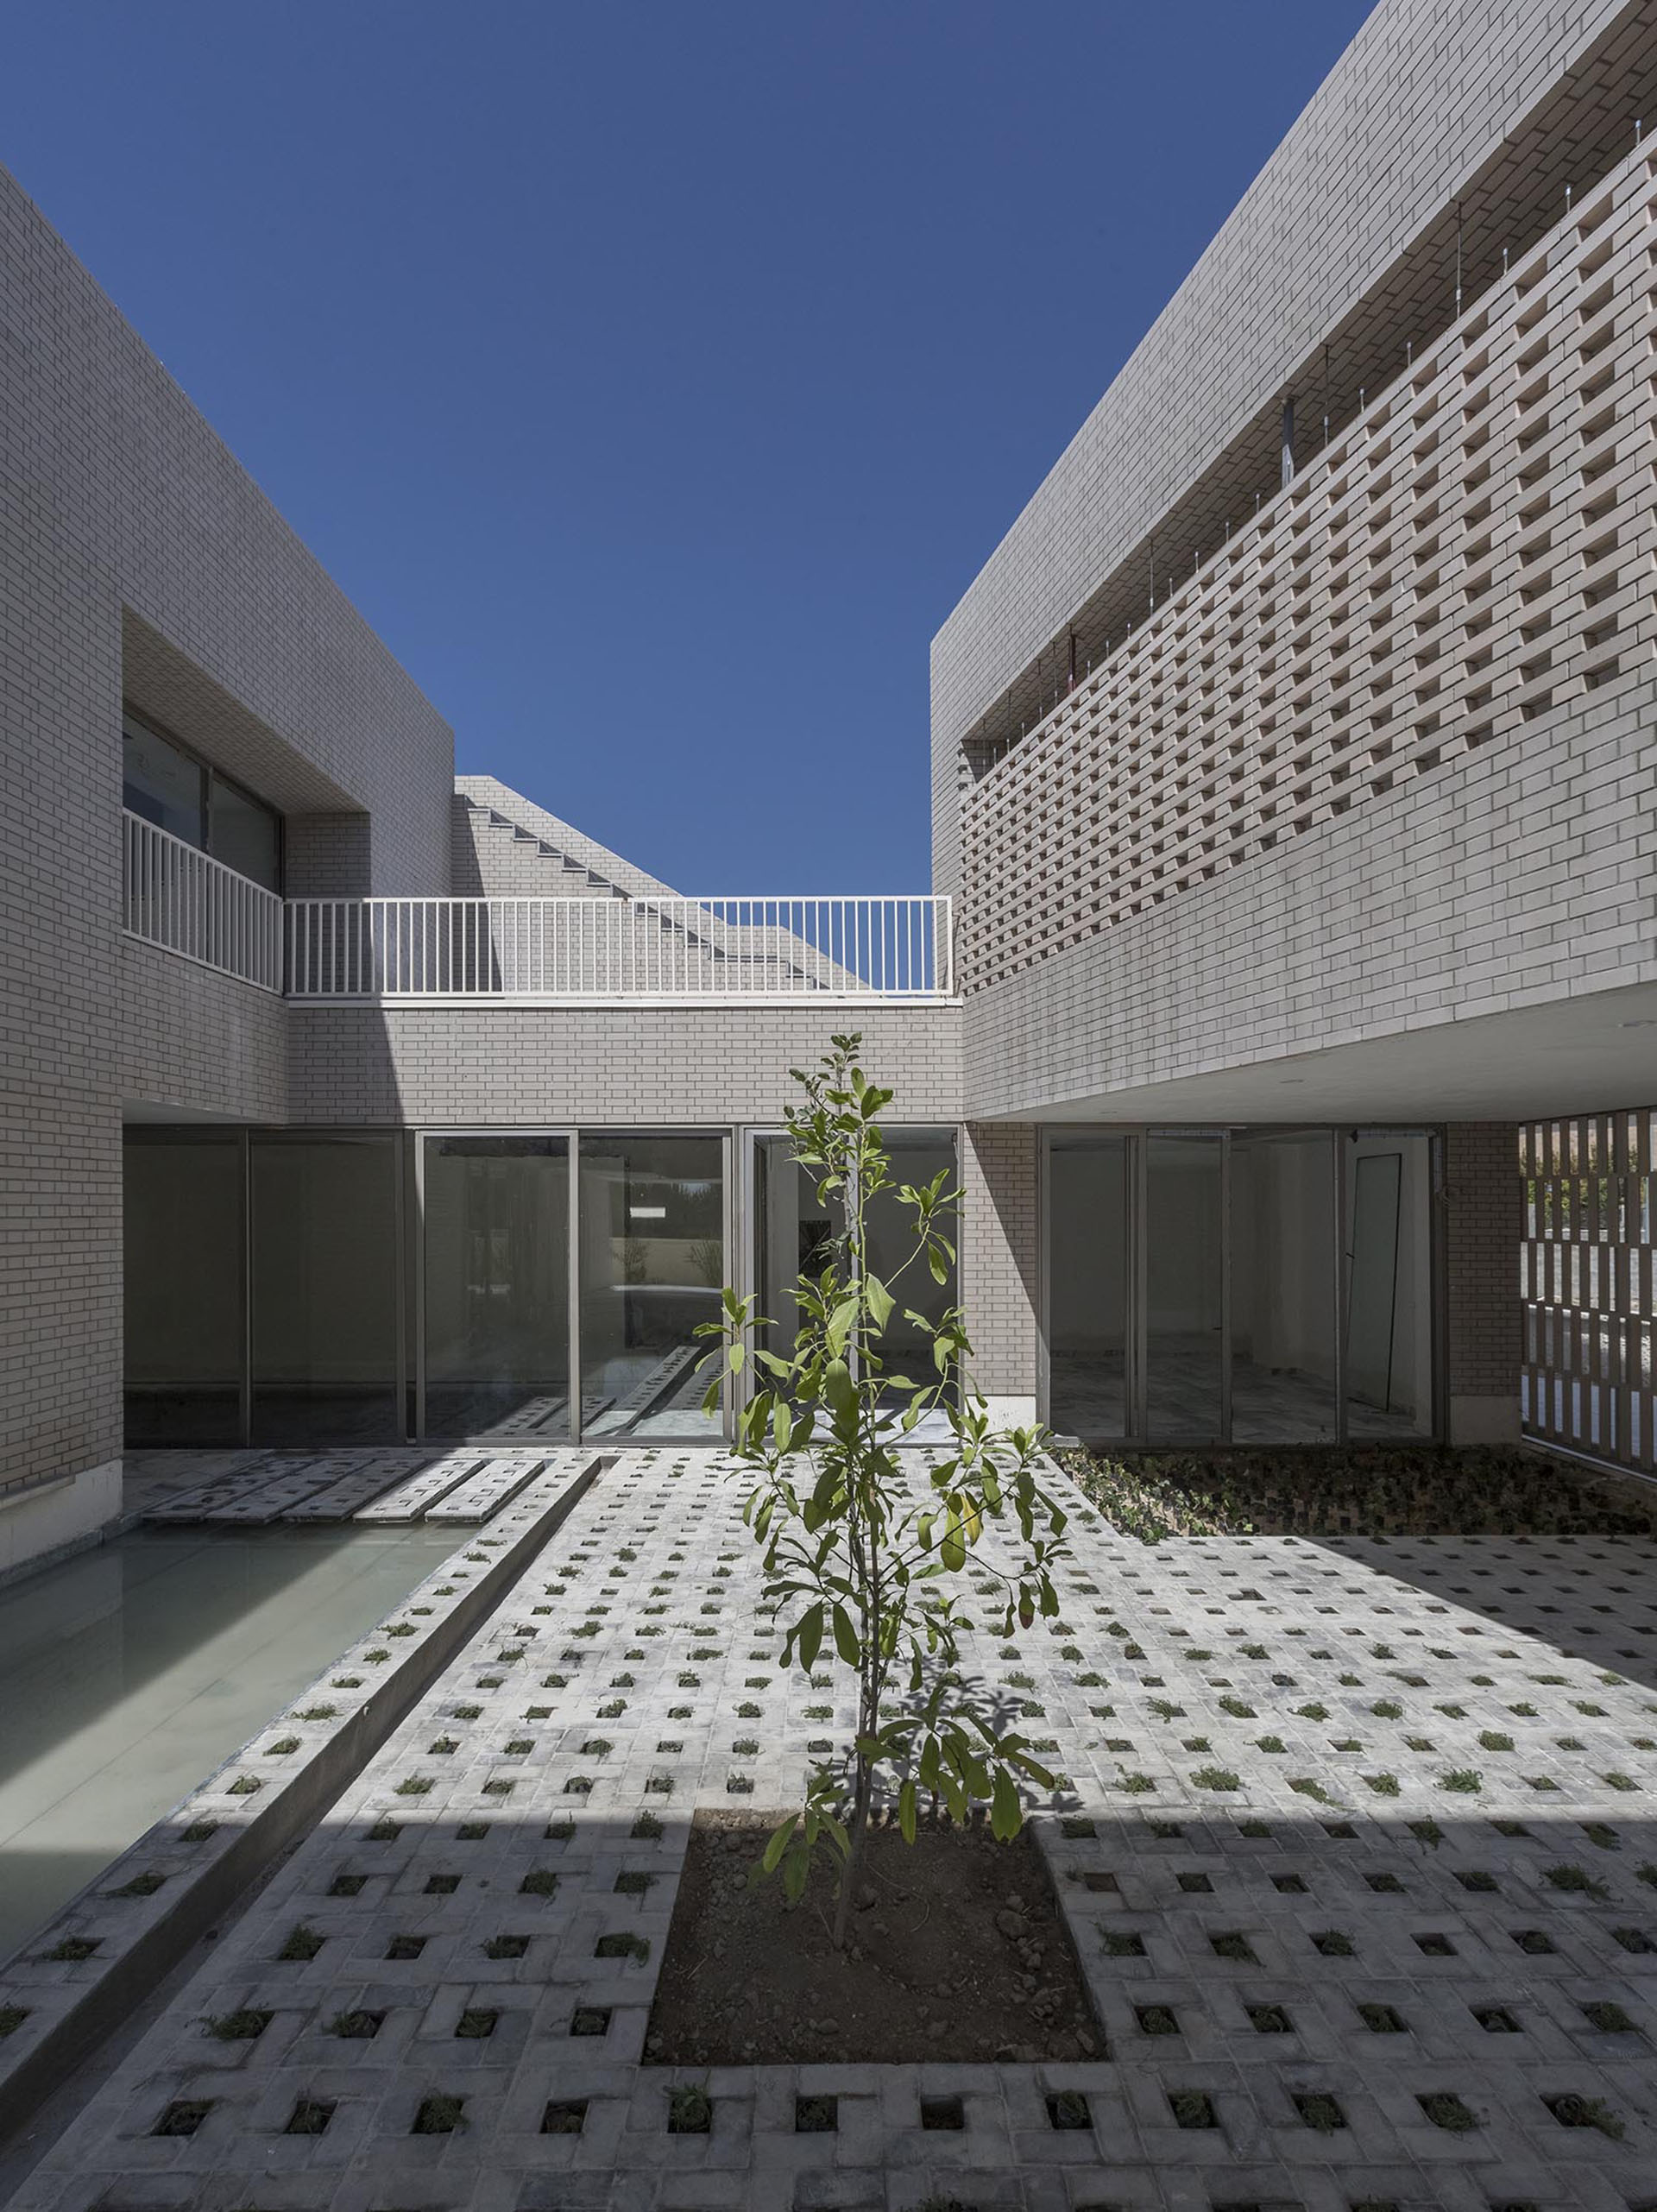 <p>The interior spaces surrounding the courtyards are glazed with large glass doors that open fully, expanding the interiors into the courtyards; when desired, moveable partitions may be closed to seclude the interiors.</p>